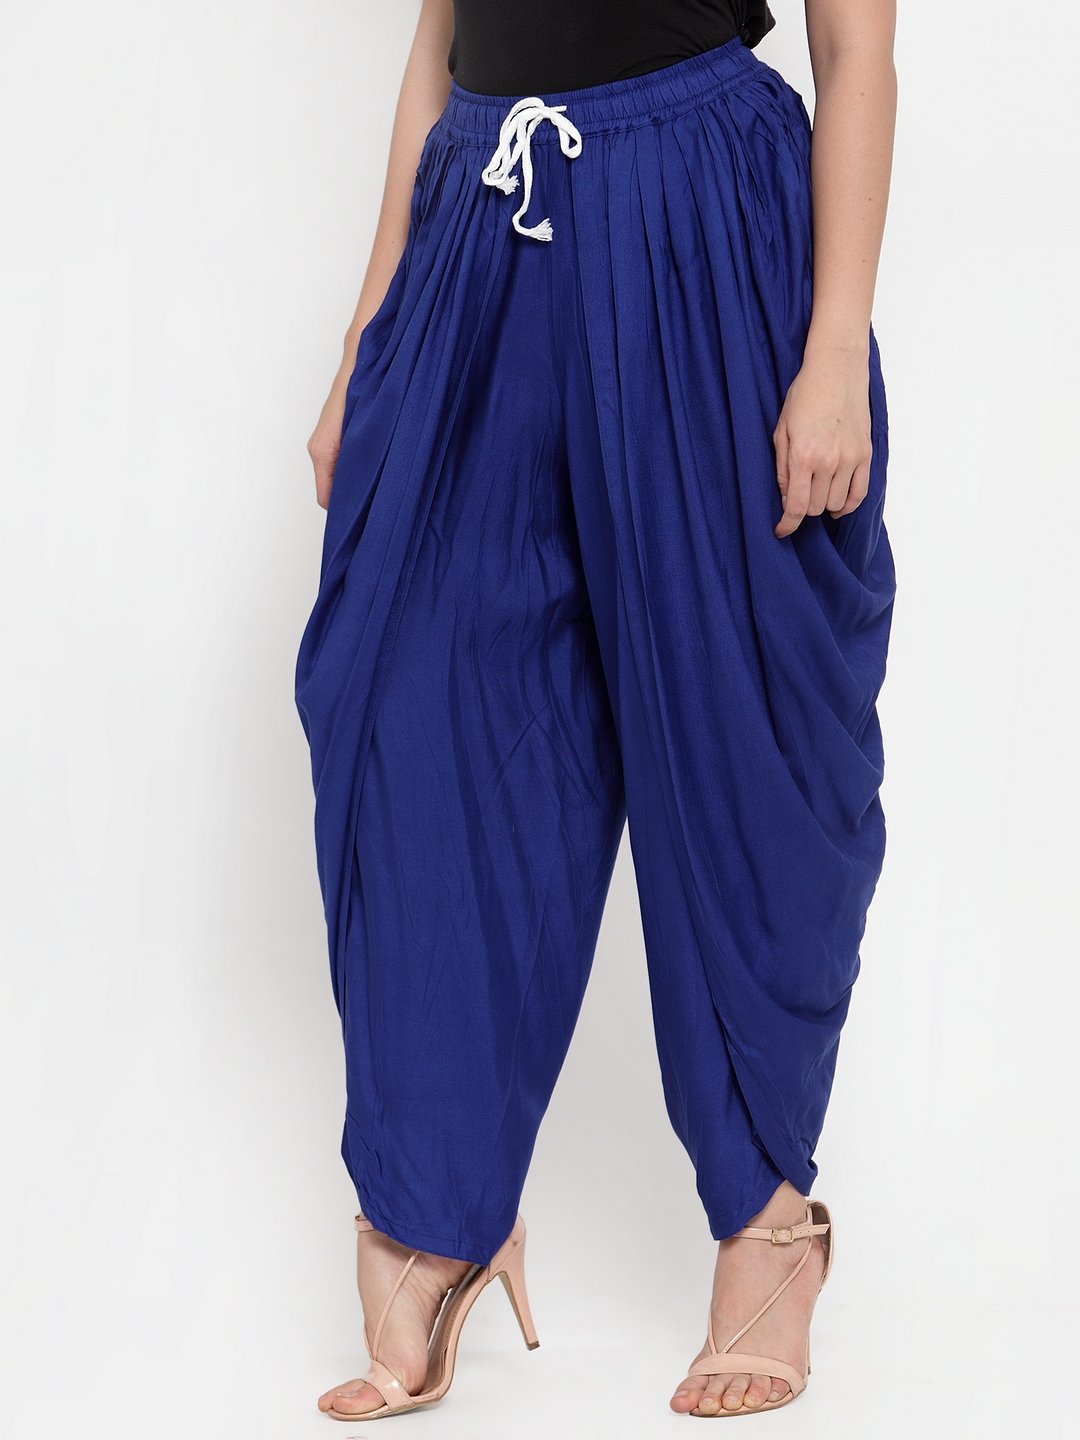 Women's Royal Blue Solid Dhoti - Jompers